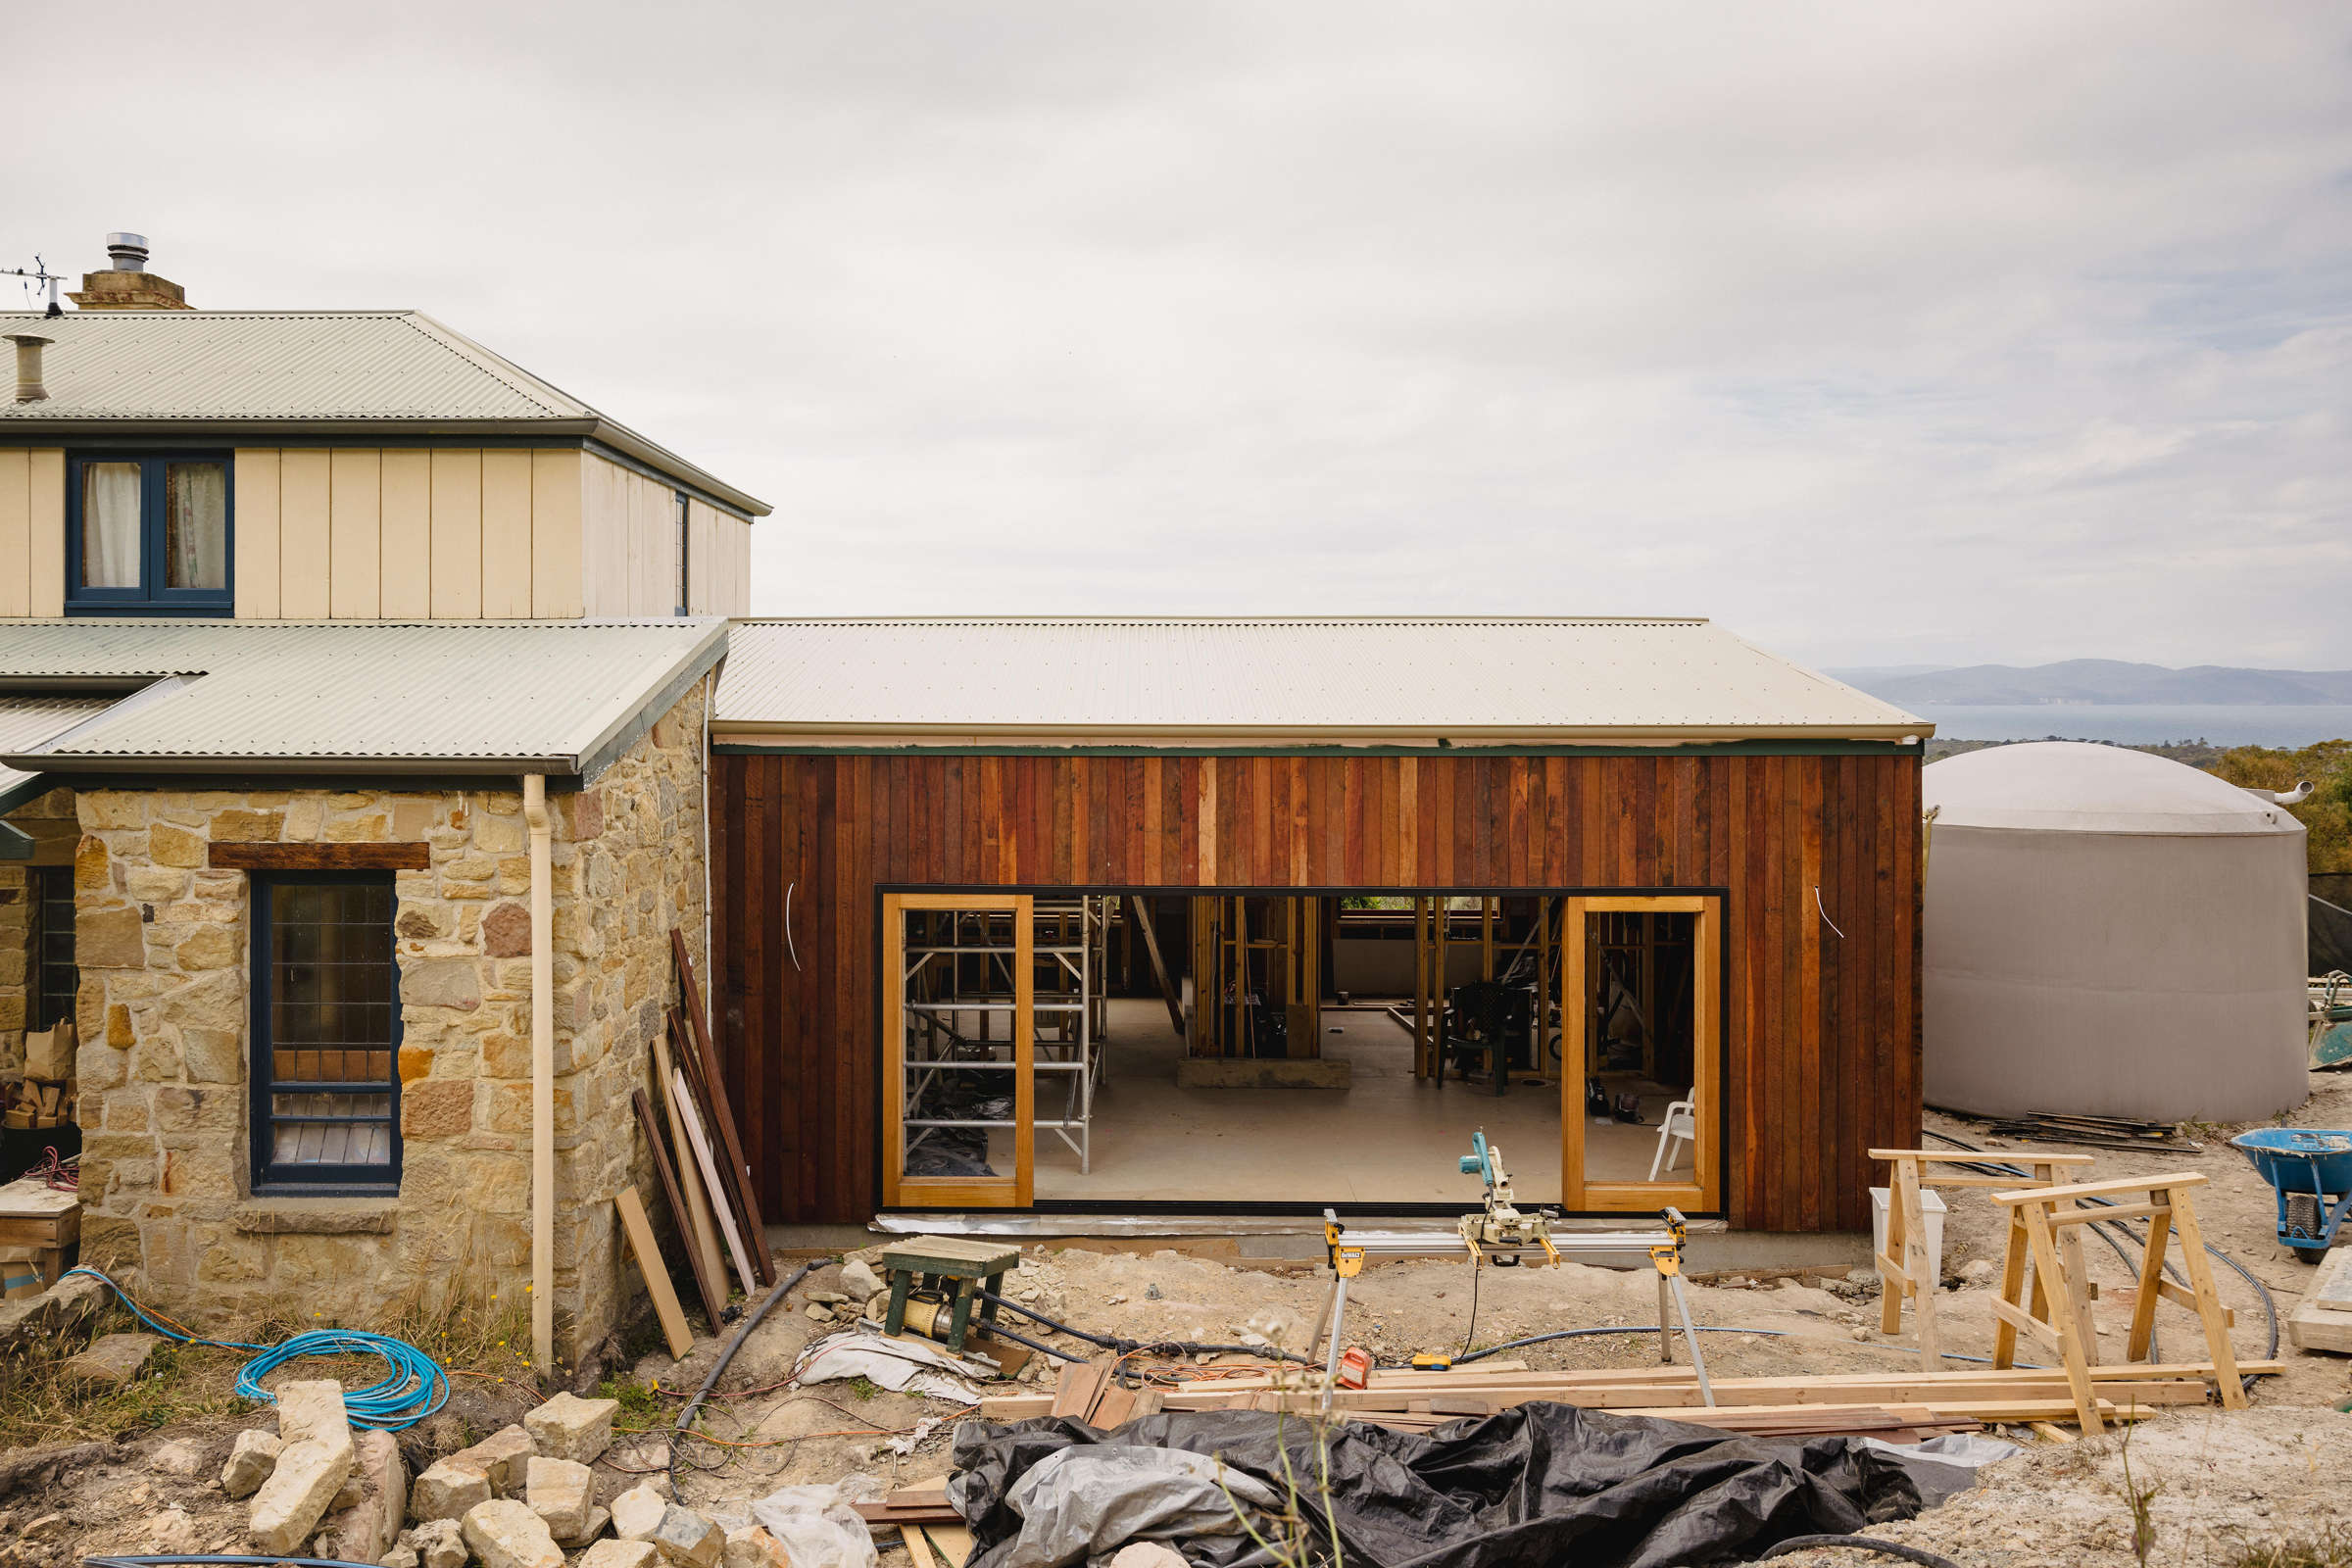 Home renovation featuring natural stone internally, stone walls, specialised timber framing and bifold doors. The renovation was completed to accommodate a growing family and take advantage of the spectacular view. Photo: Jordan Davis.